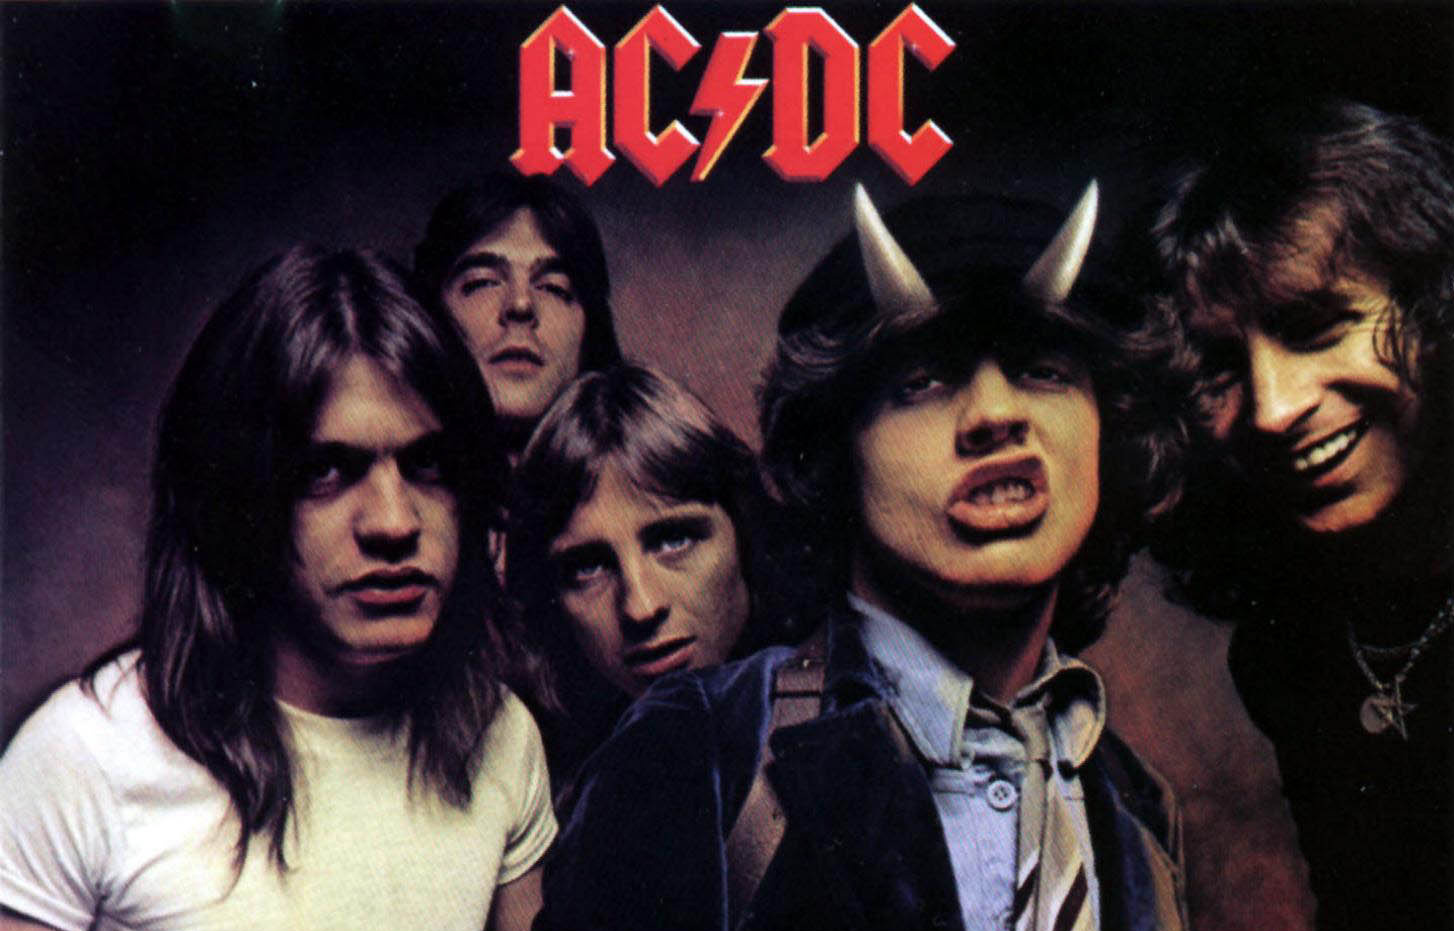 🎸 Pick 16 of Your Favorite Classic Rock Songs and We’ll Guess Your Age and Gender ACDC